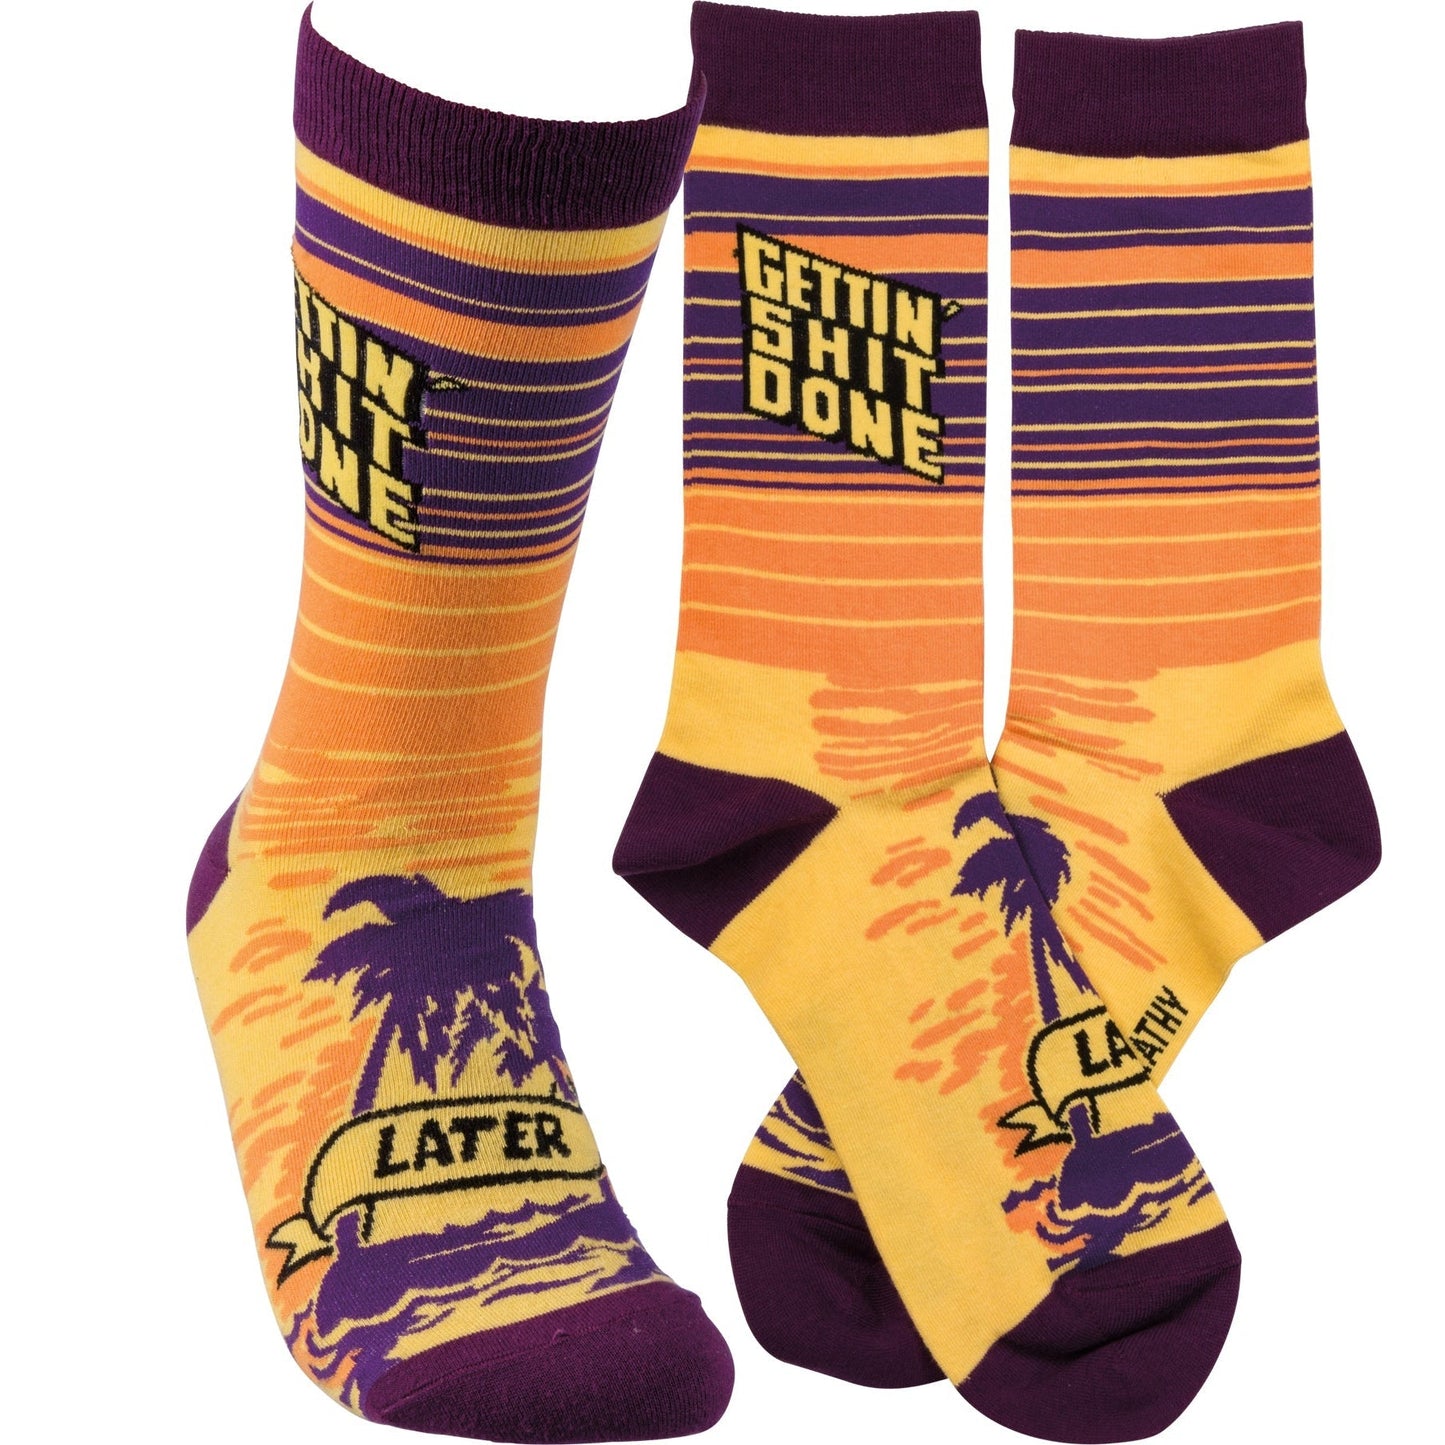 Gettin' Shit Done Later Socks Colorful Striped Funny Novelty Socks